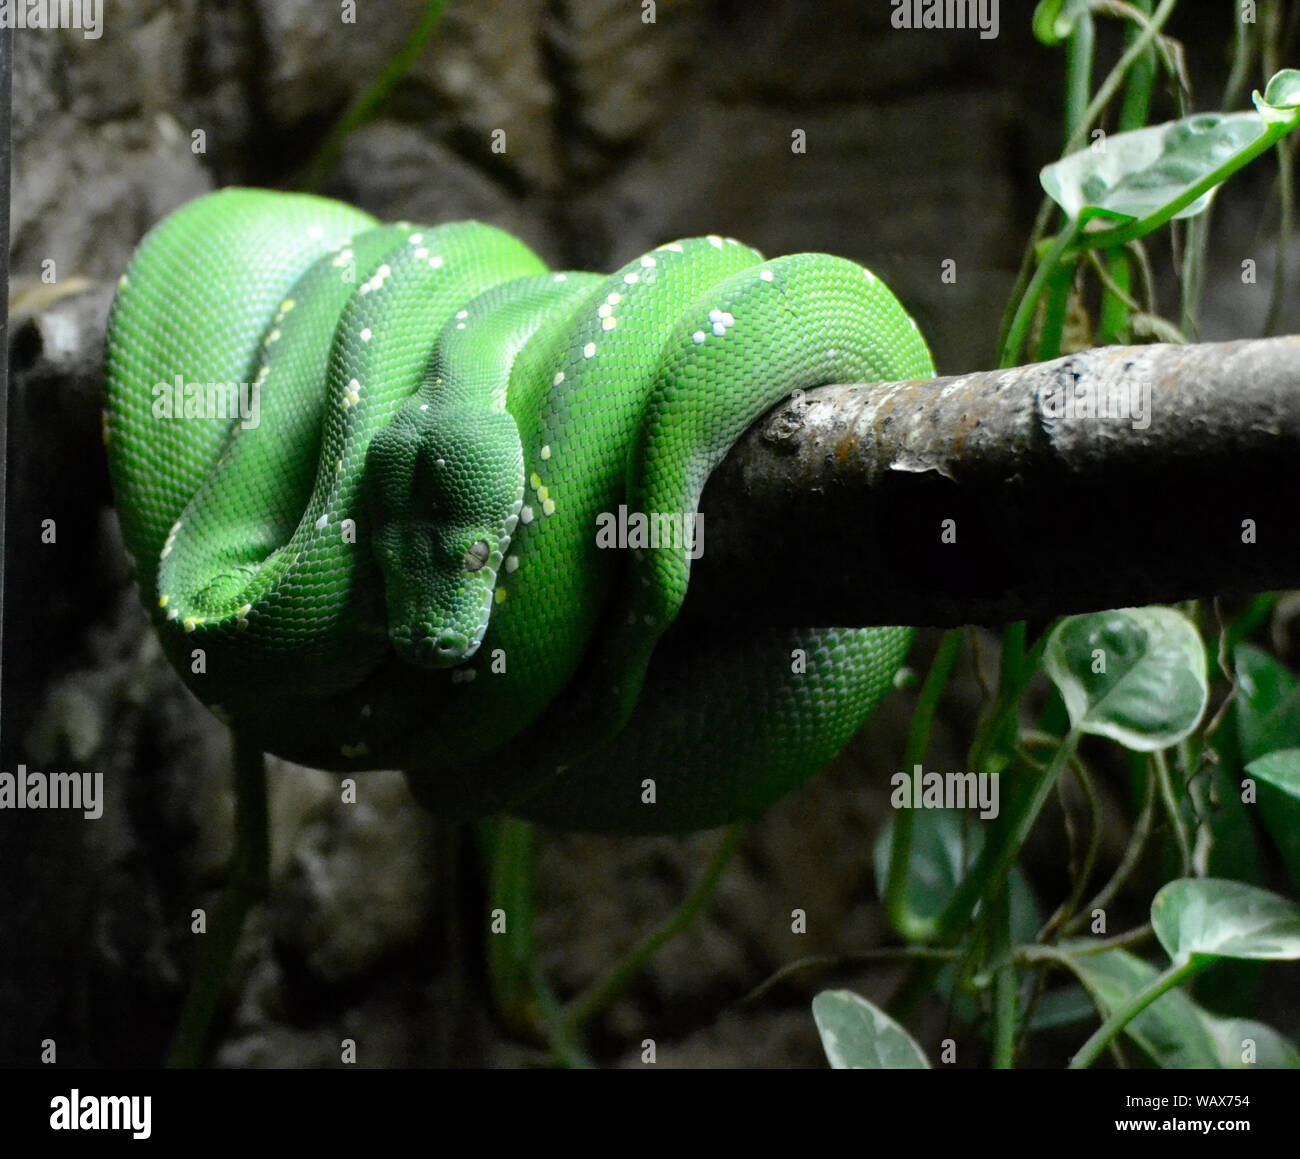 Green Tree Python at Cotswold Wildlife Park, Burford, Oxfordshire, UK. Part of the Cotswolds. Stock Photo